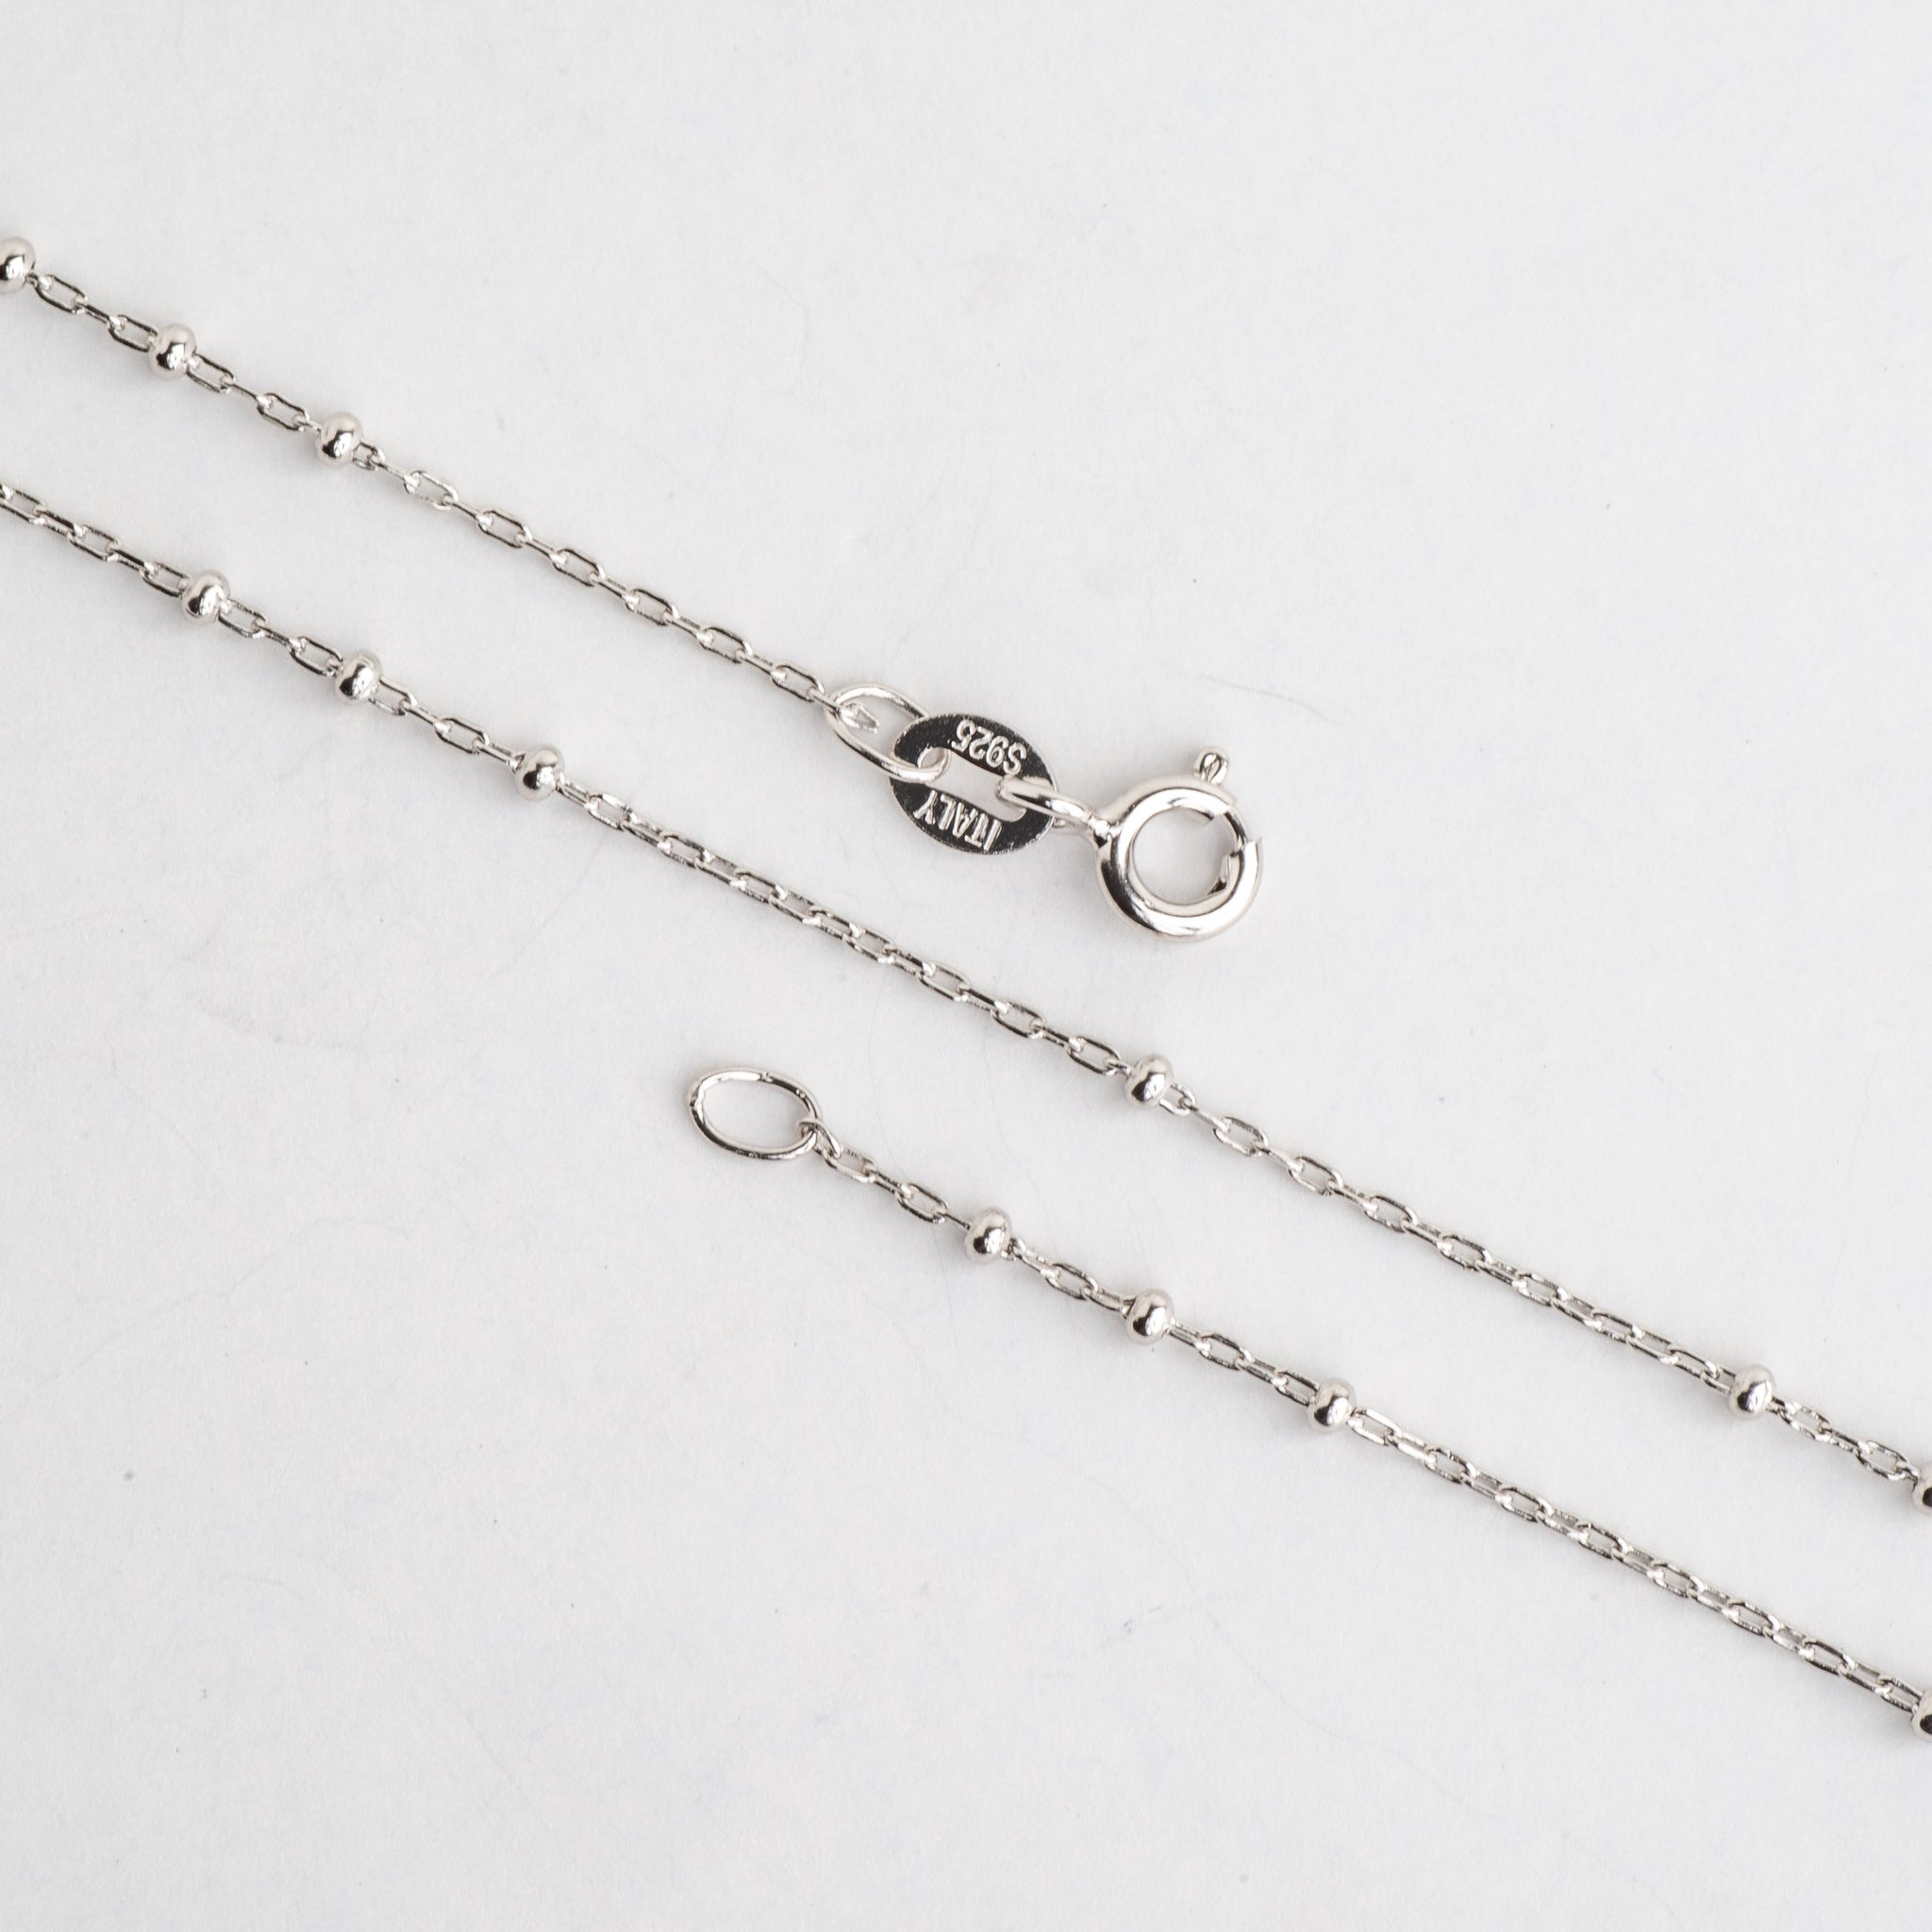 Necklace 16 inch N9ST 1mm Satellite Chain With 1.75mm Bead Sterling Silver Necklace With Spring Ring Clasp Available in 3 Sizes Made in Italy .925 Sterling Silver N9ST16